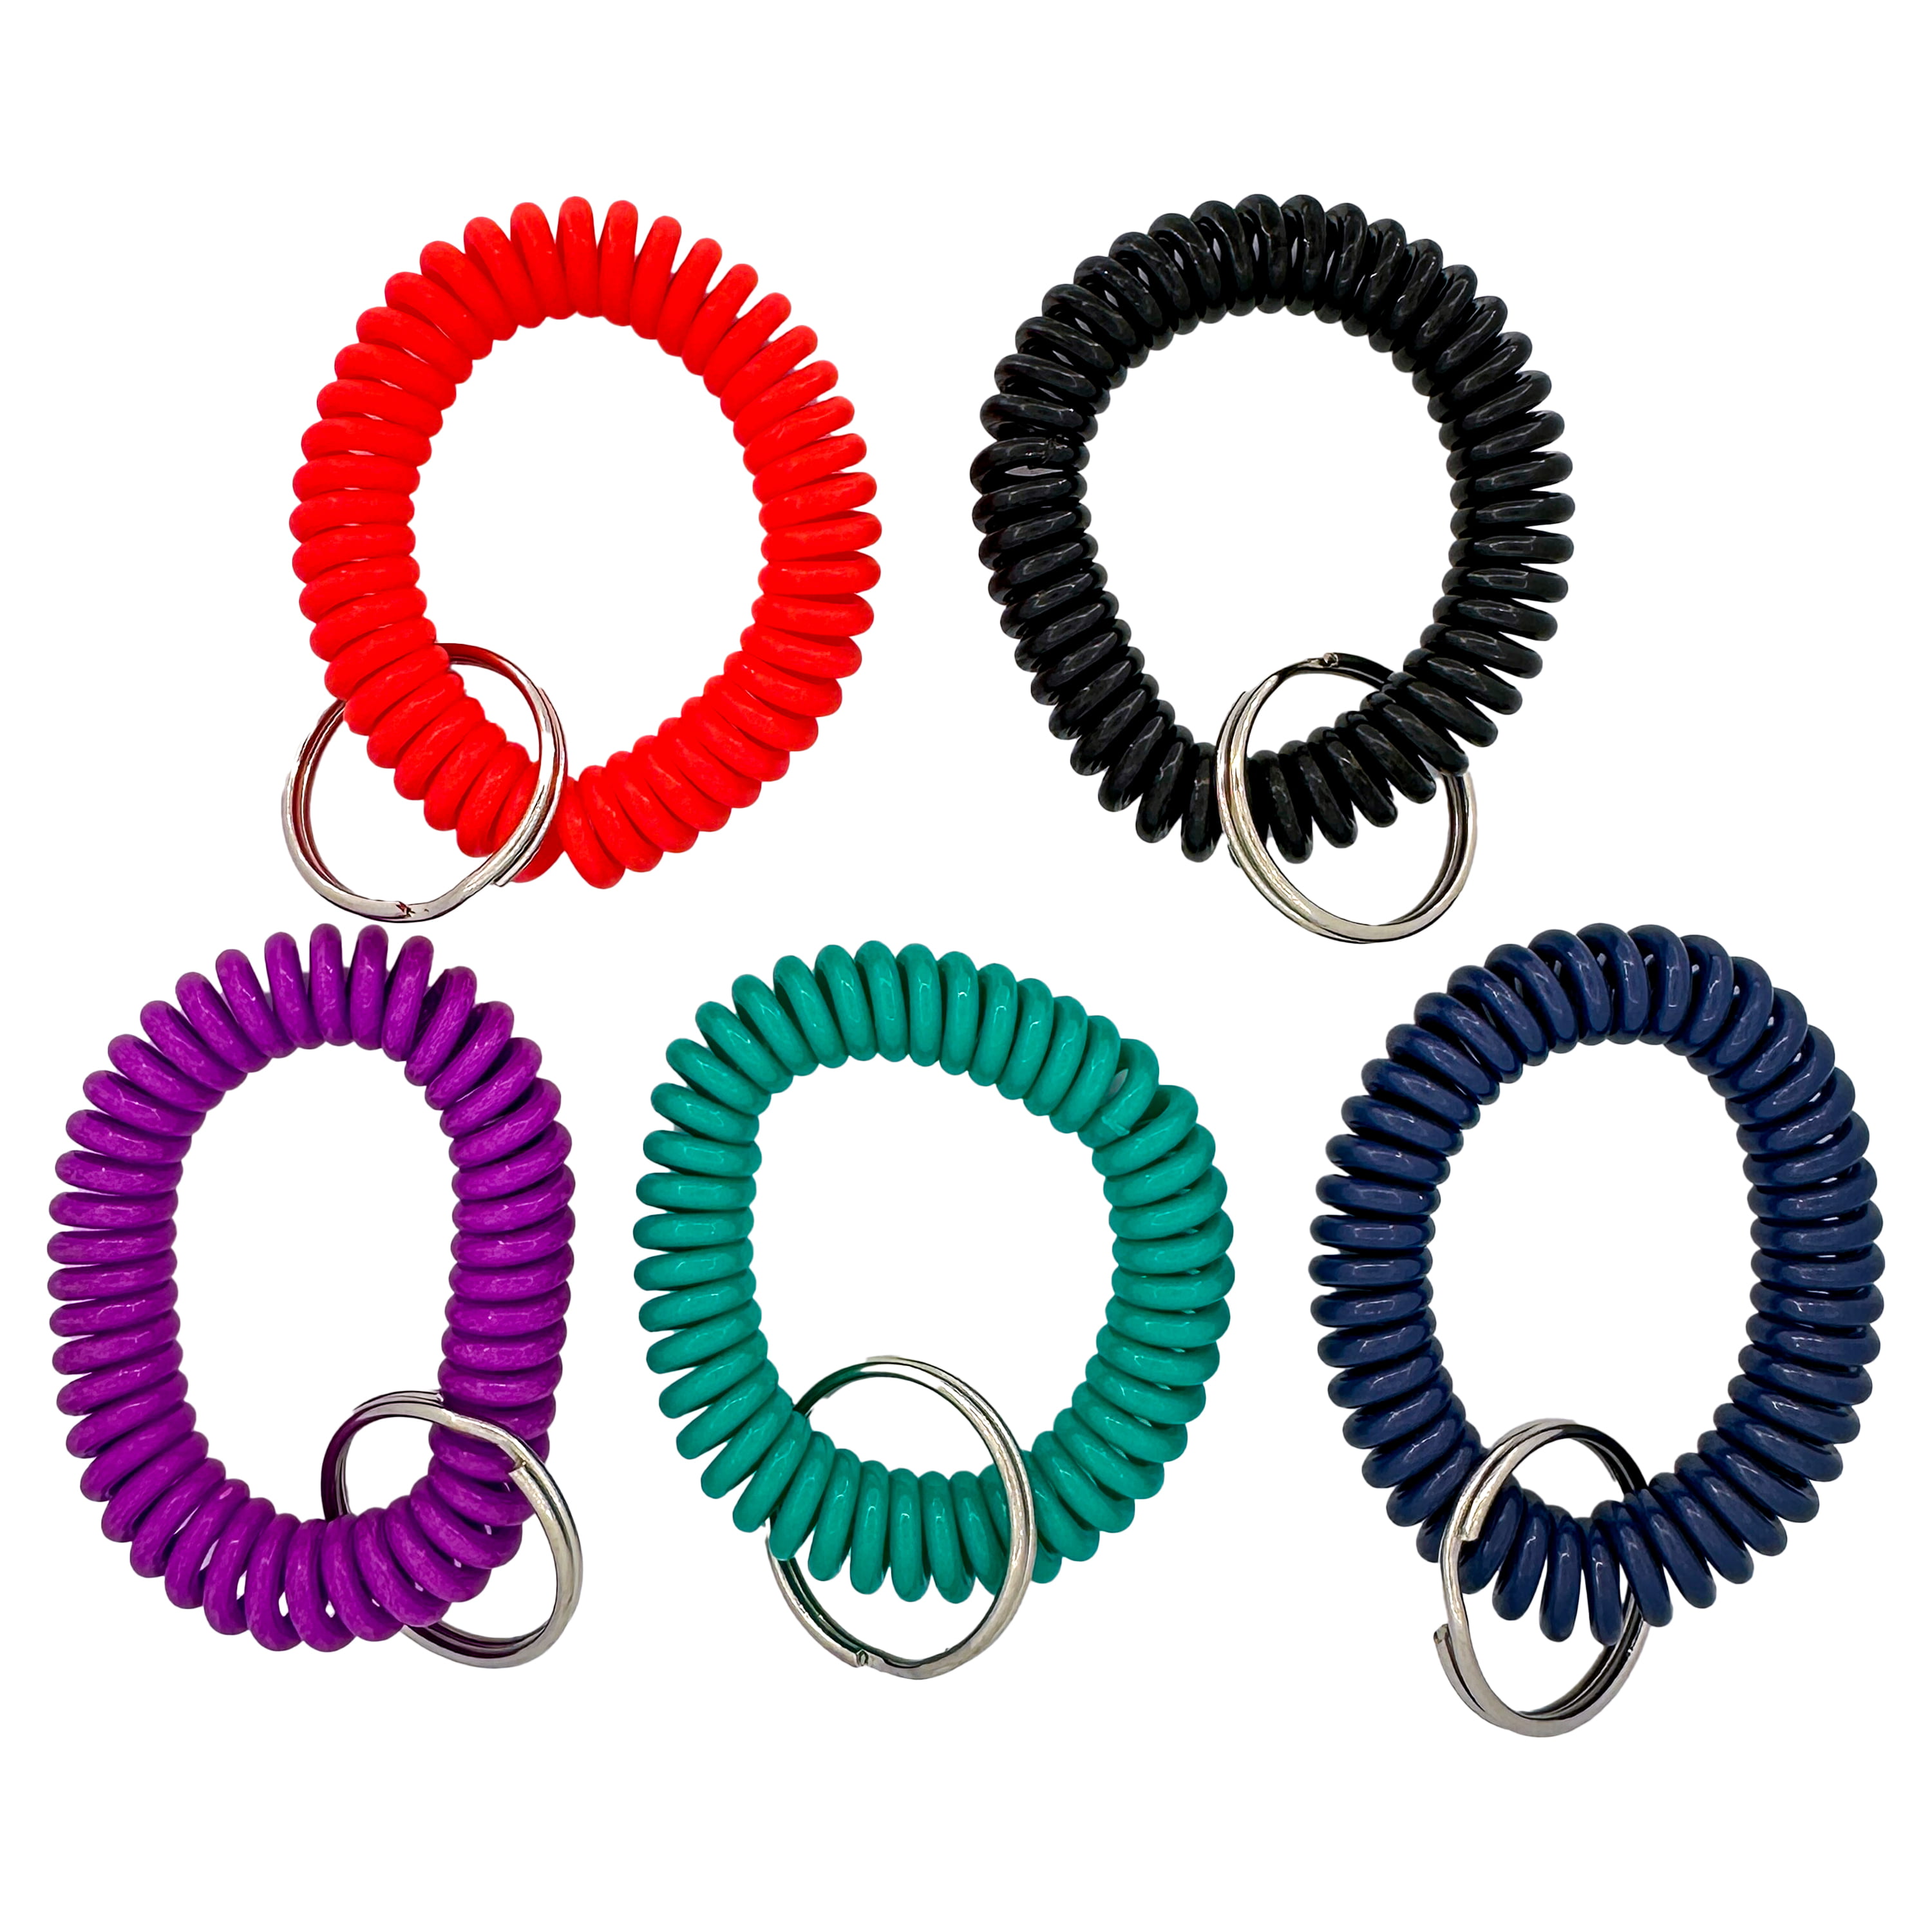 HY-KO Clip-On Coiled Key Ring Assortment KC156 - The Home Depot